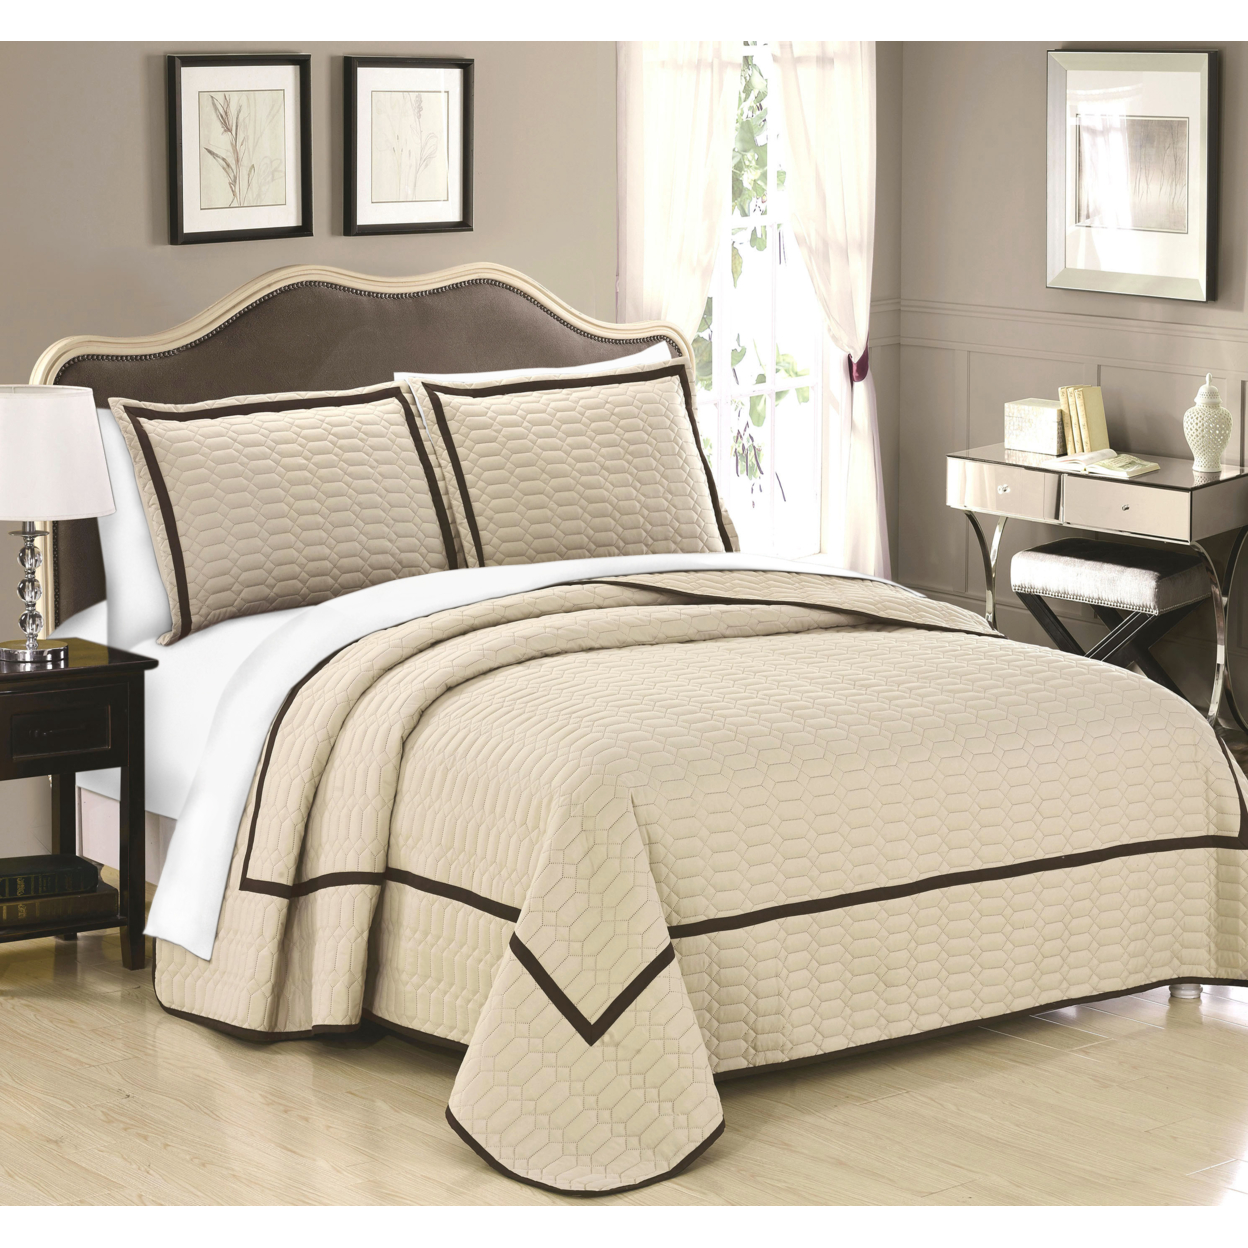 3 Or 2 Piece Halrowe Hotel Collection 2 Tone Banded Quilted Geometrical Embroidered Quilt Set - Beige, Twin